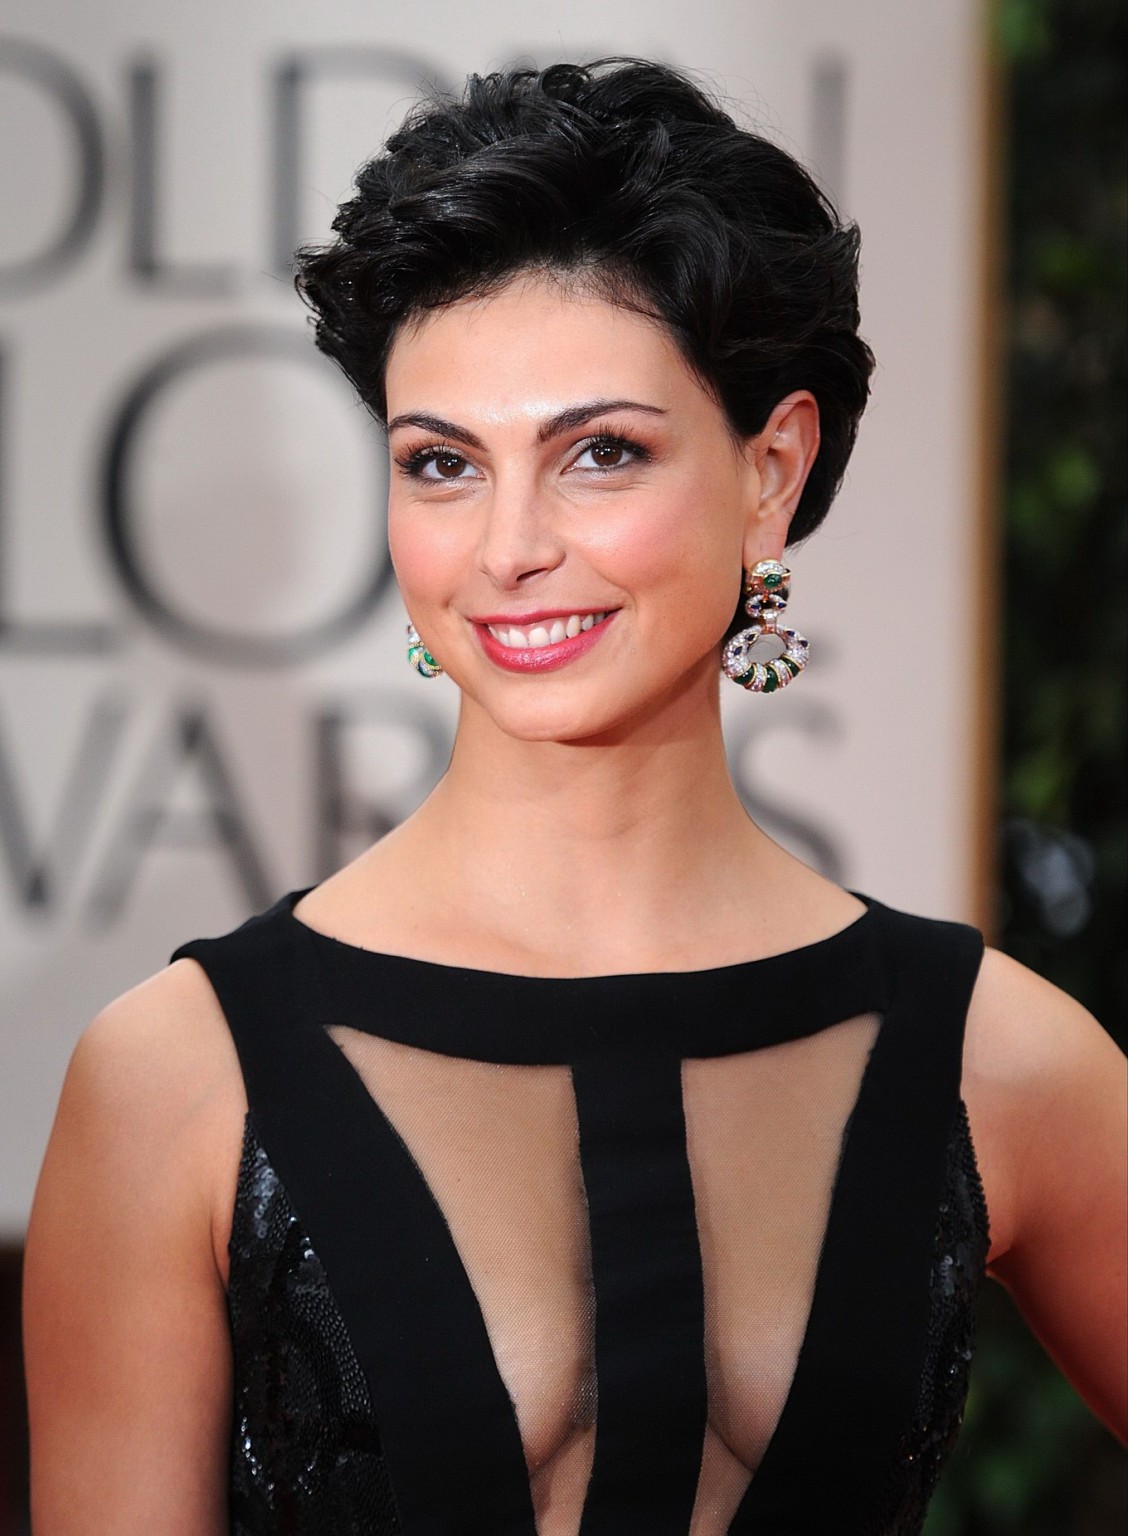 Sexy Dresses 2012 - Morena Baccarin braless wearing sexy black dress at the Golden Globes 2012  Porn Pictures, XXX Photos, Sex Images #3238486 - PICTOA